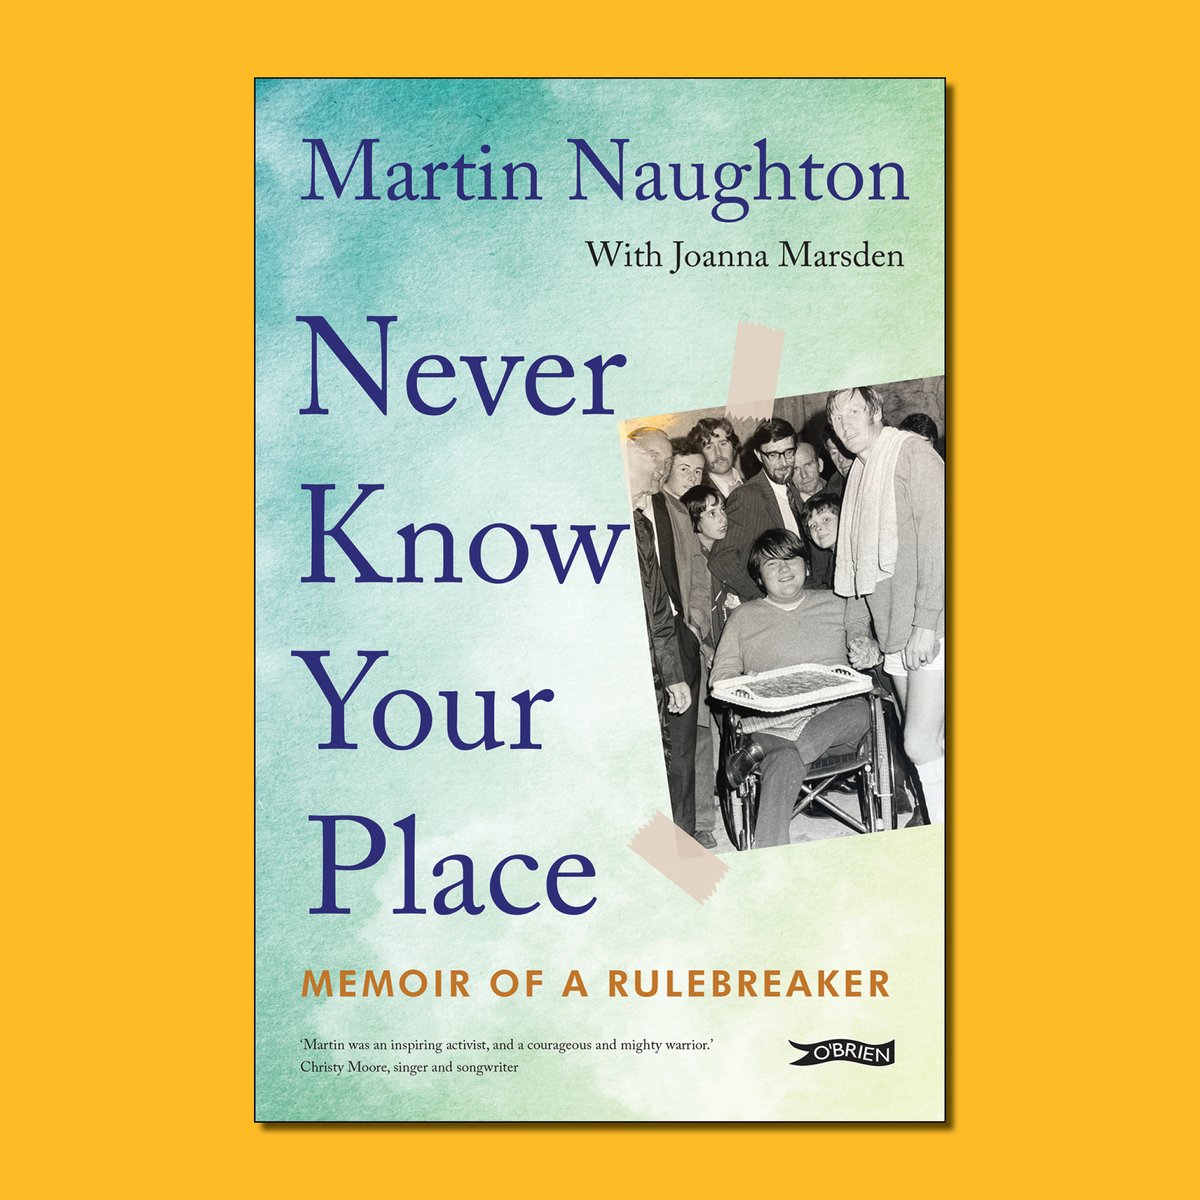 📚 Cover Reveal 📚

#NeverKnowYourPlace - Memoir of a Rulebreaker by Martin Naughton with @JoannaRMarsden.

The story of a young man who led the fight for freedom for disabled people.

In Bookshops 11th March.

@DisabilityFed @IrishWheelchair @ILMIreland